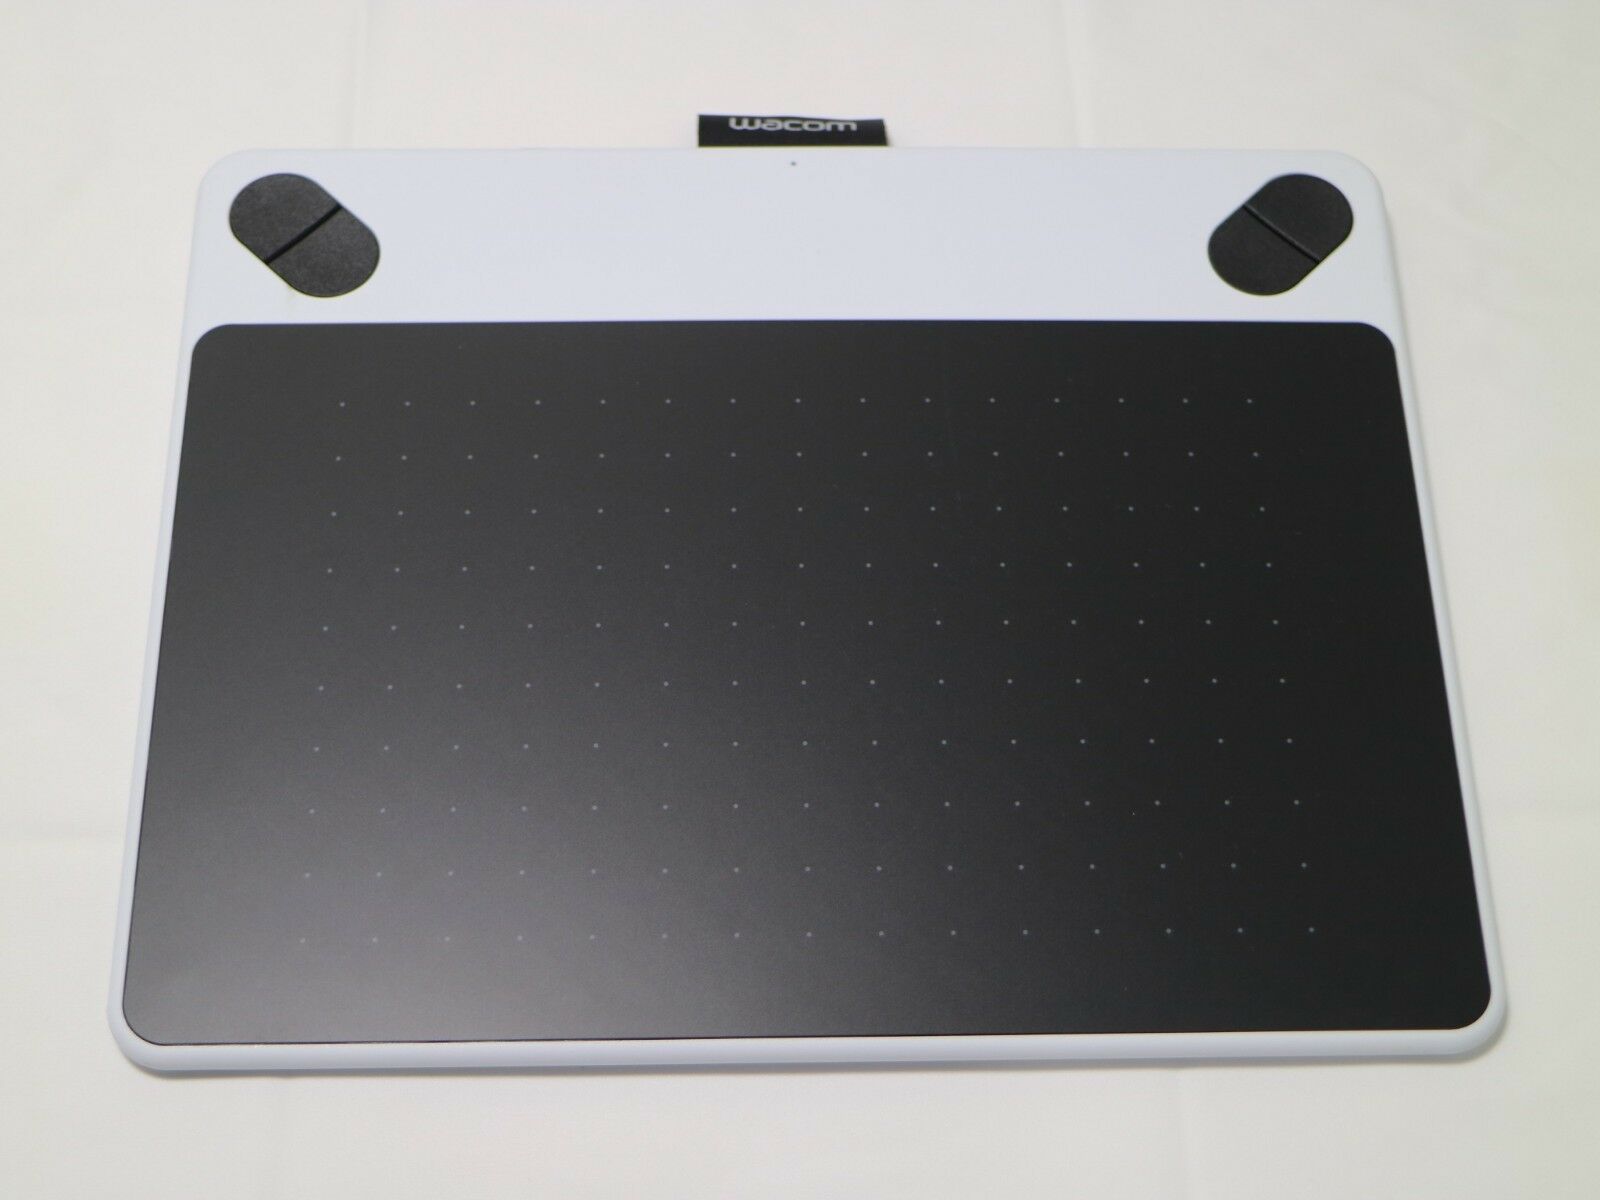 Wacom Intuos Draw CTL490W Digital Drawing And Graphics Tablet *Tablet ONLY*works